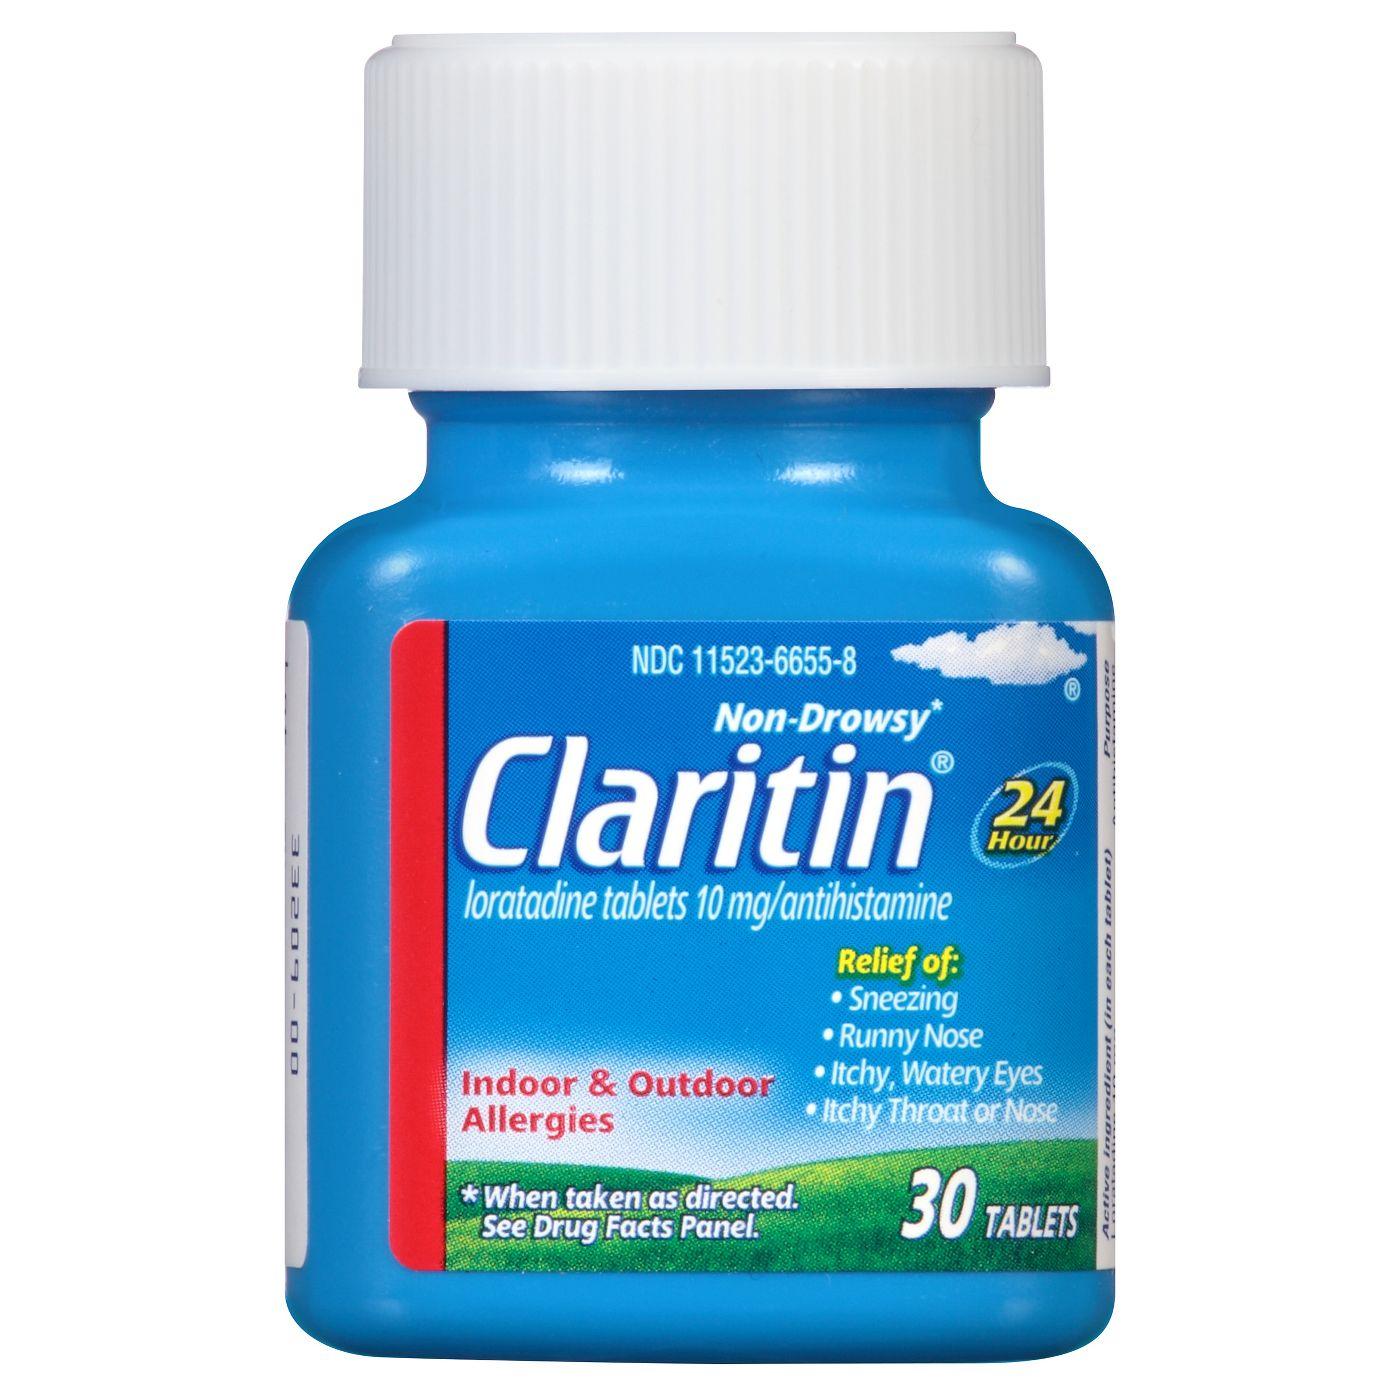 Claritin 24 Hour Indoor & Outdoor Non-Drowsy Allergy Relief Tablets - Loratadine - 30 Tablets